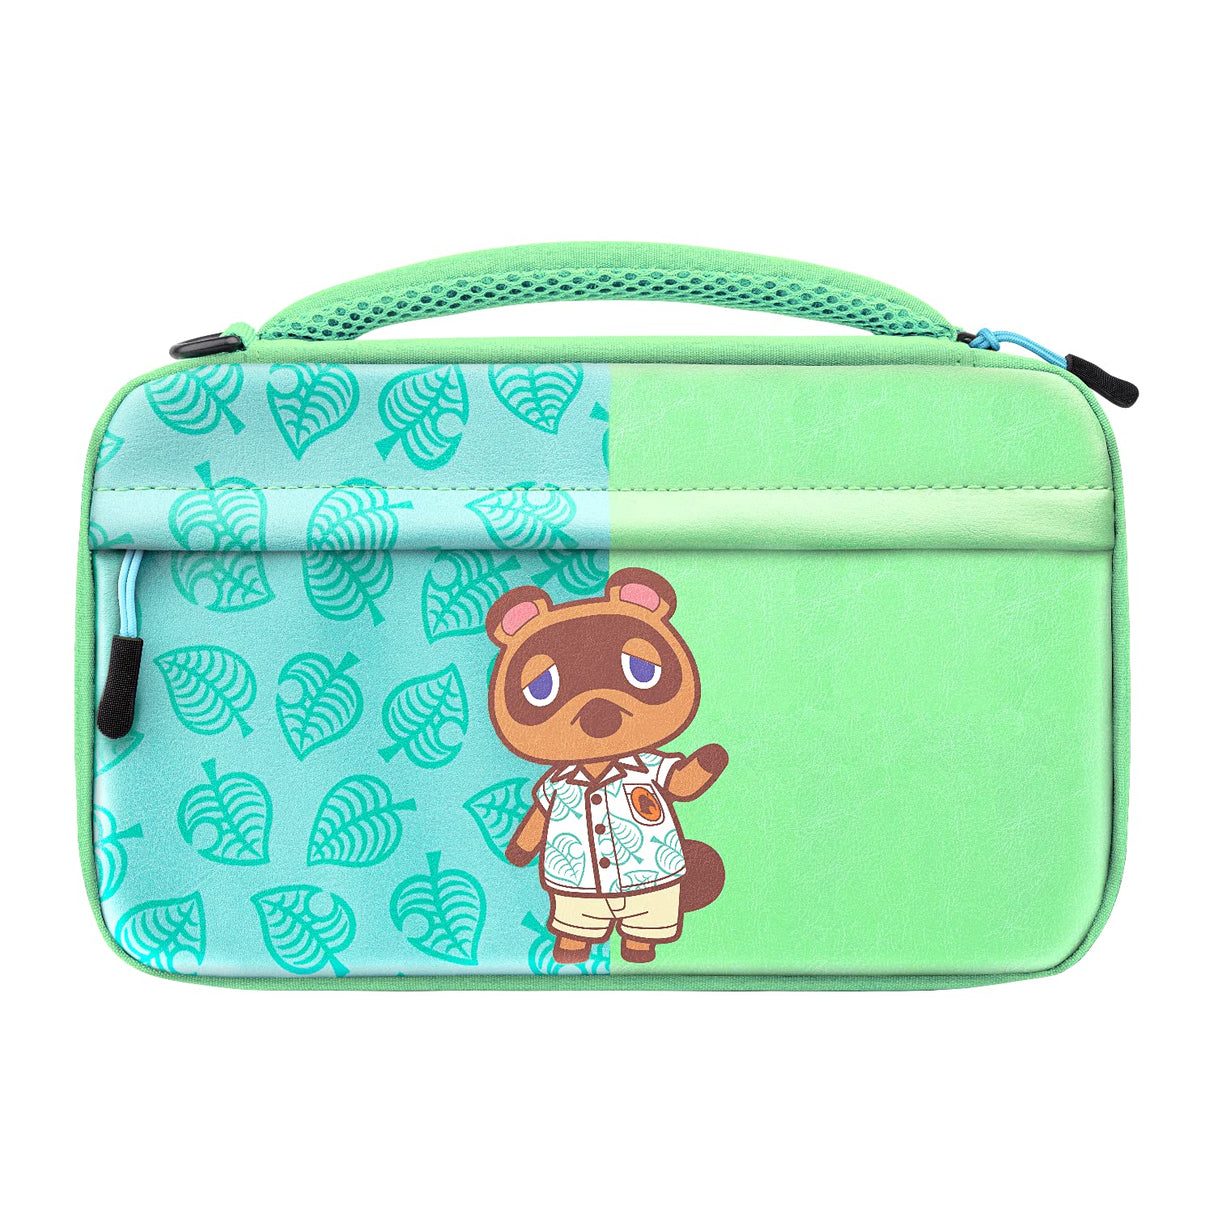 PDP Gaming Officially Licensed Switch Commuter Case - Animal Crossing - Semi-Hardshell Protection - Protective PU Leather - Holds 14 Games - Works with Switch OLED &amp; Lite - Perfect for Kids / Travel Animal Crossing Tom Nook